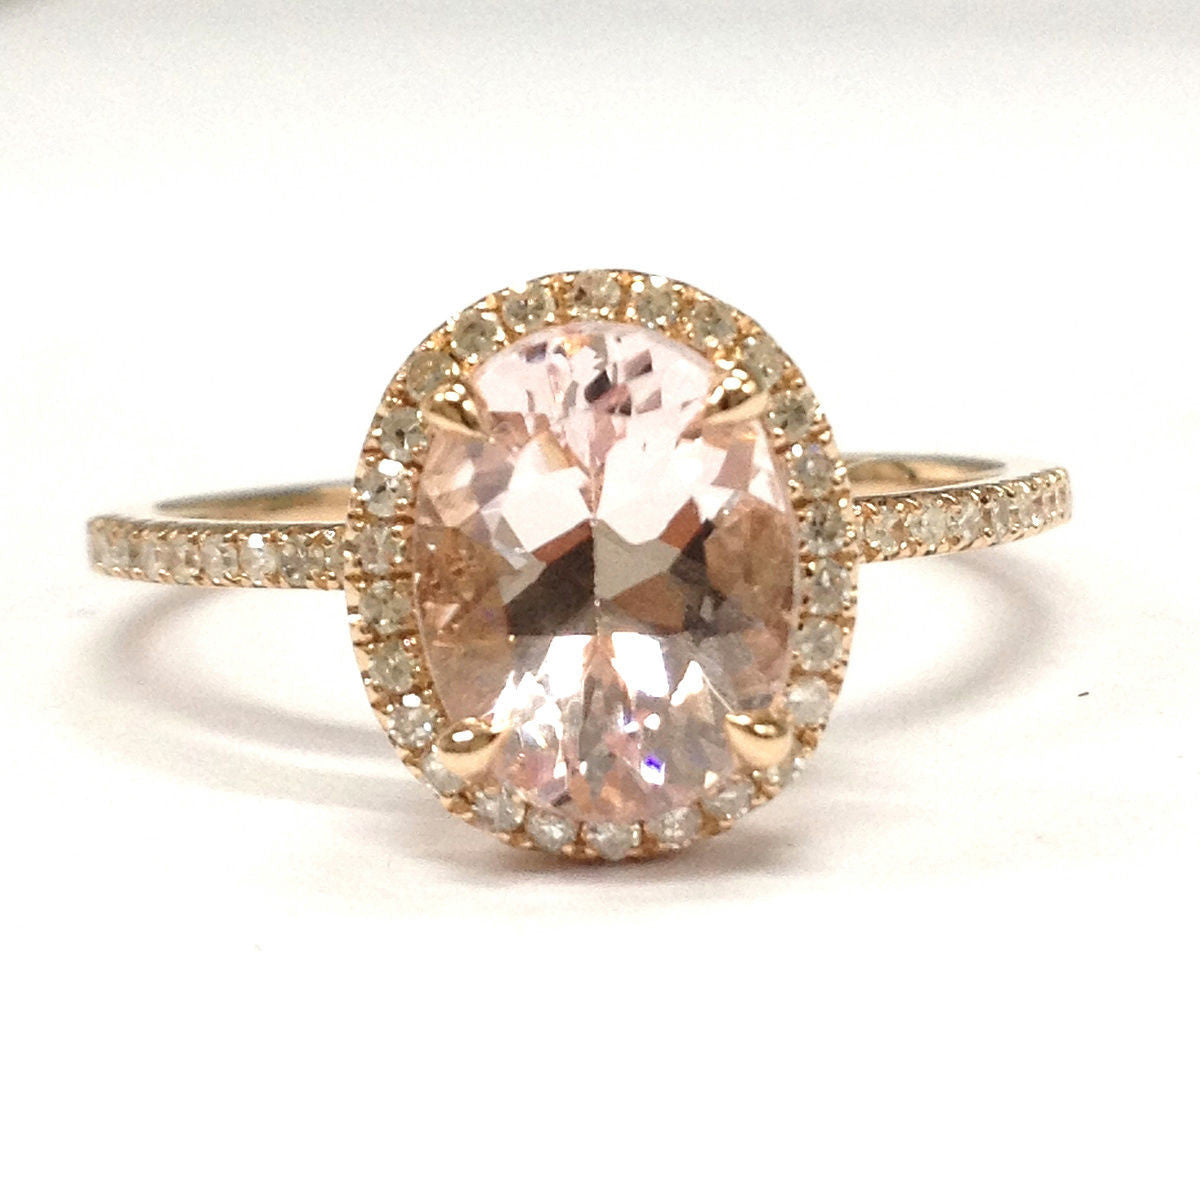 Oval Morganite Engagement Ring Pave Diamond Wedding 14K Rose Gold 7x9mm - Lord of Gem Rings - 1